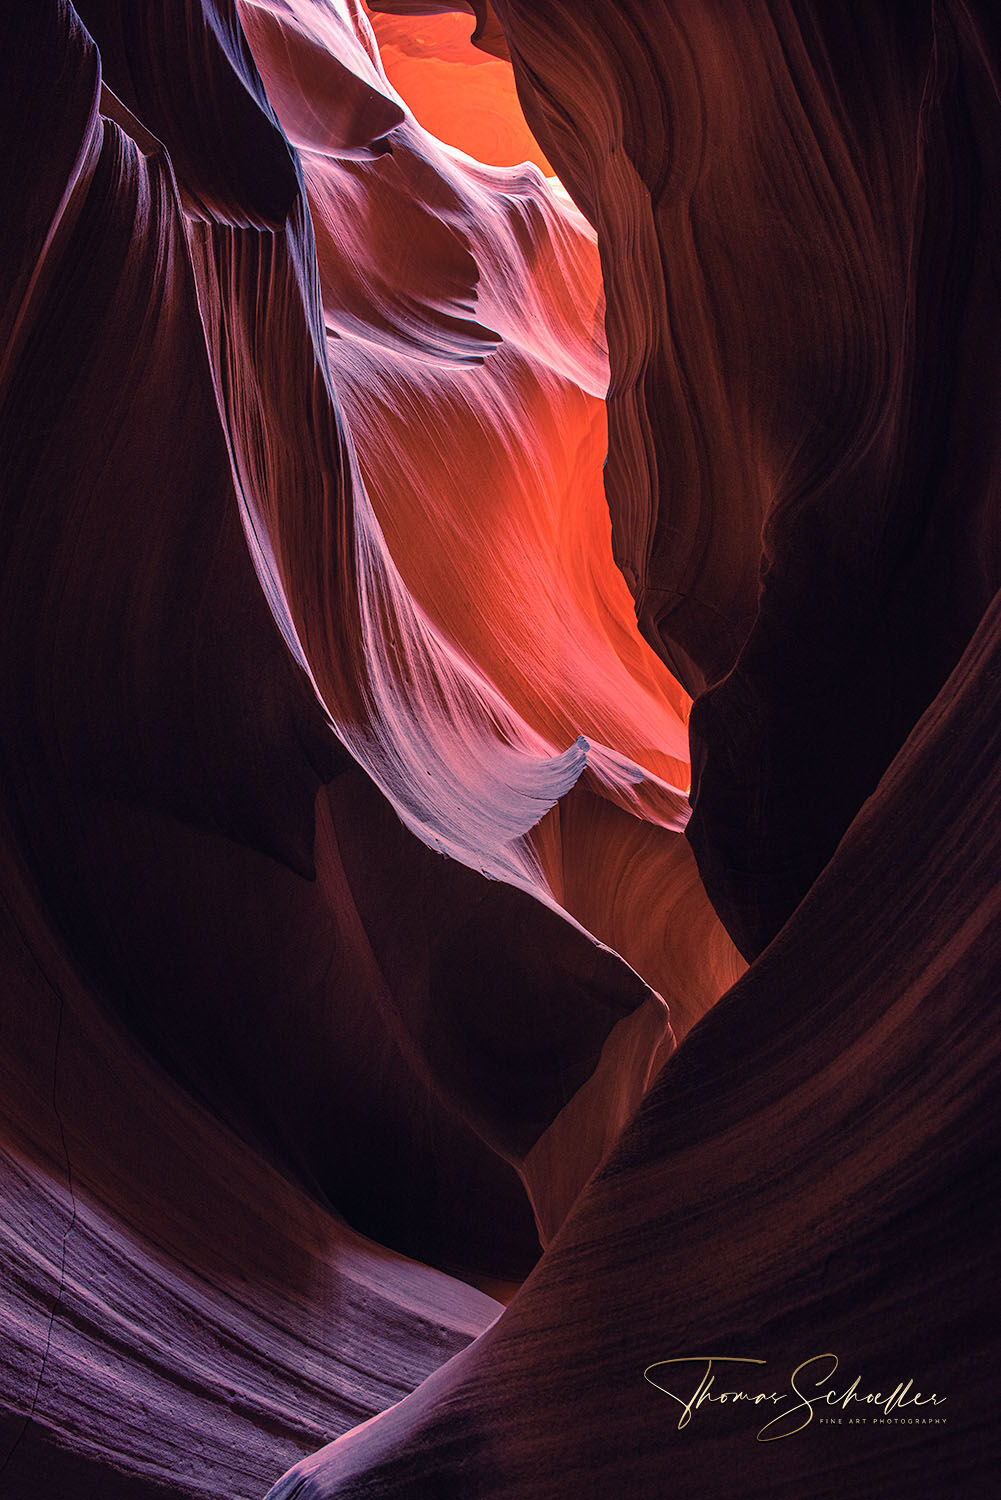 The subterranean world of Antelope canyon illuminated by bounce light | Mind-blowing vibrant colors and sensual shapes - Limited Edition Abstract prints  